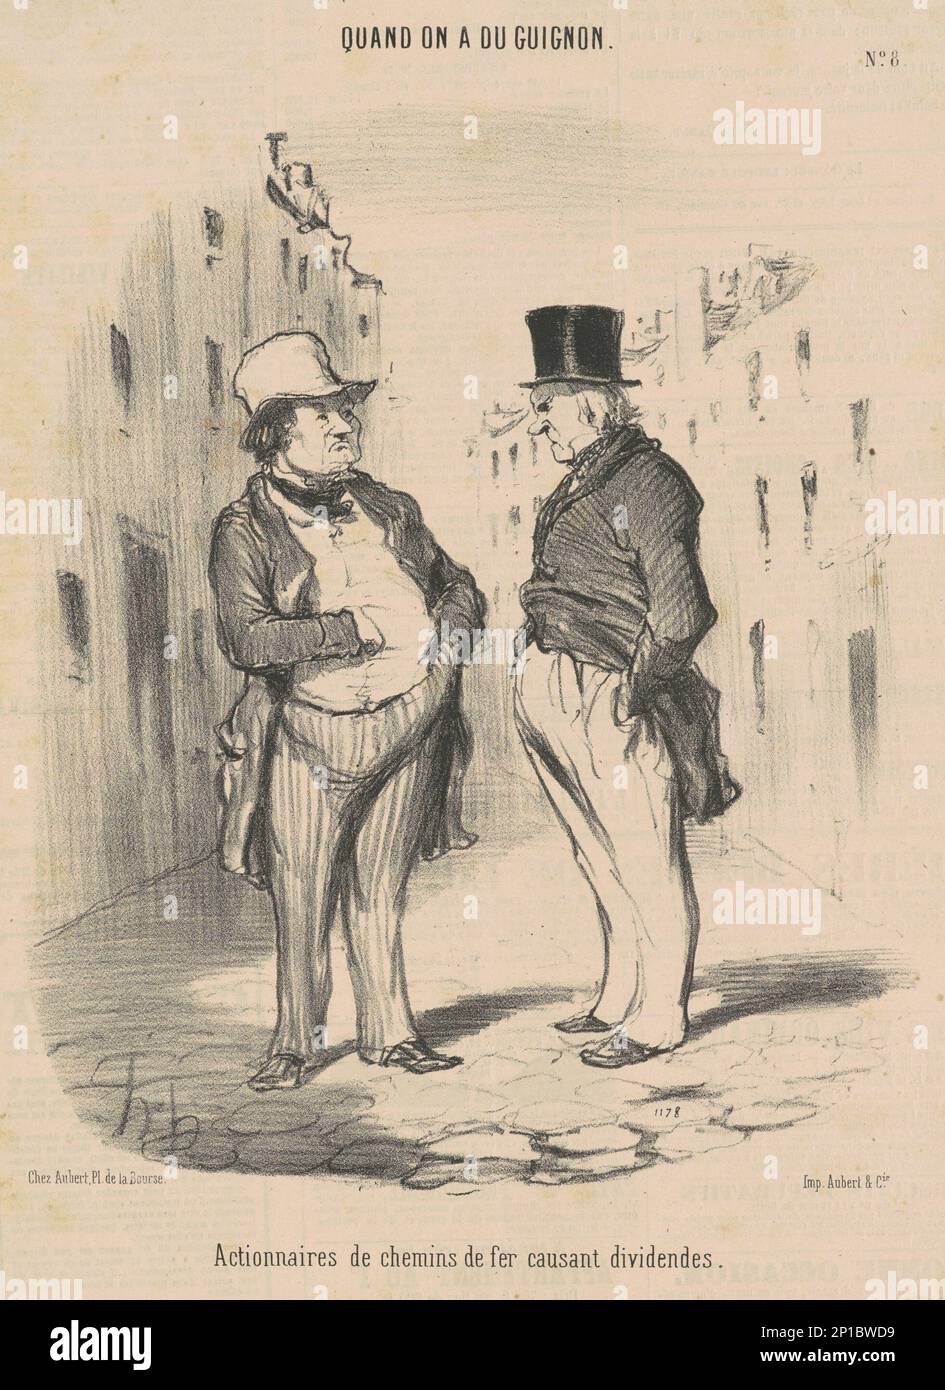 Actionnaires de chemins de fer causant dividendes, 19th century. When one has bad luck. Railway shareholders discussing dividends. Stock Photo